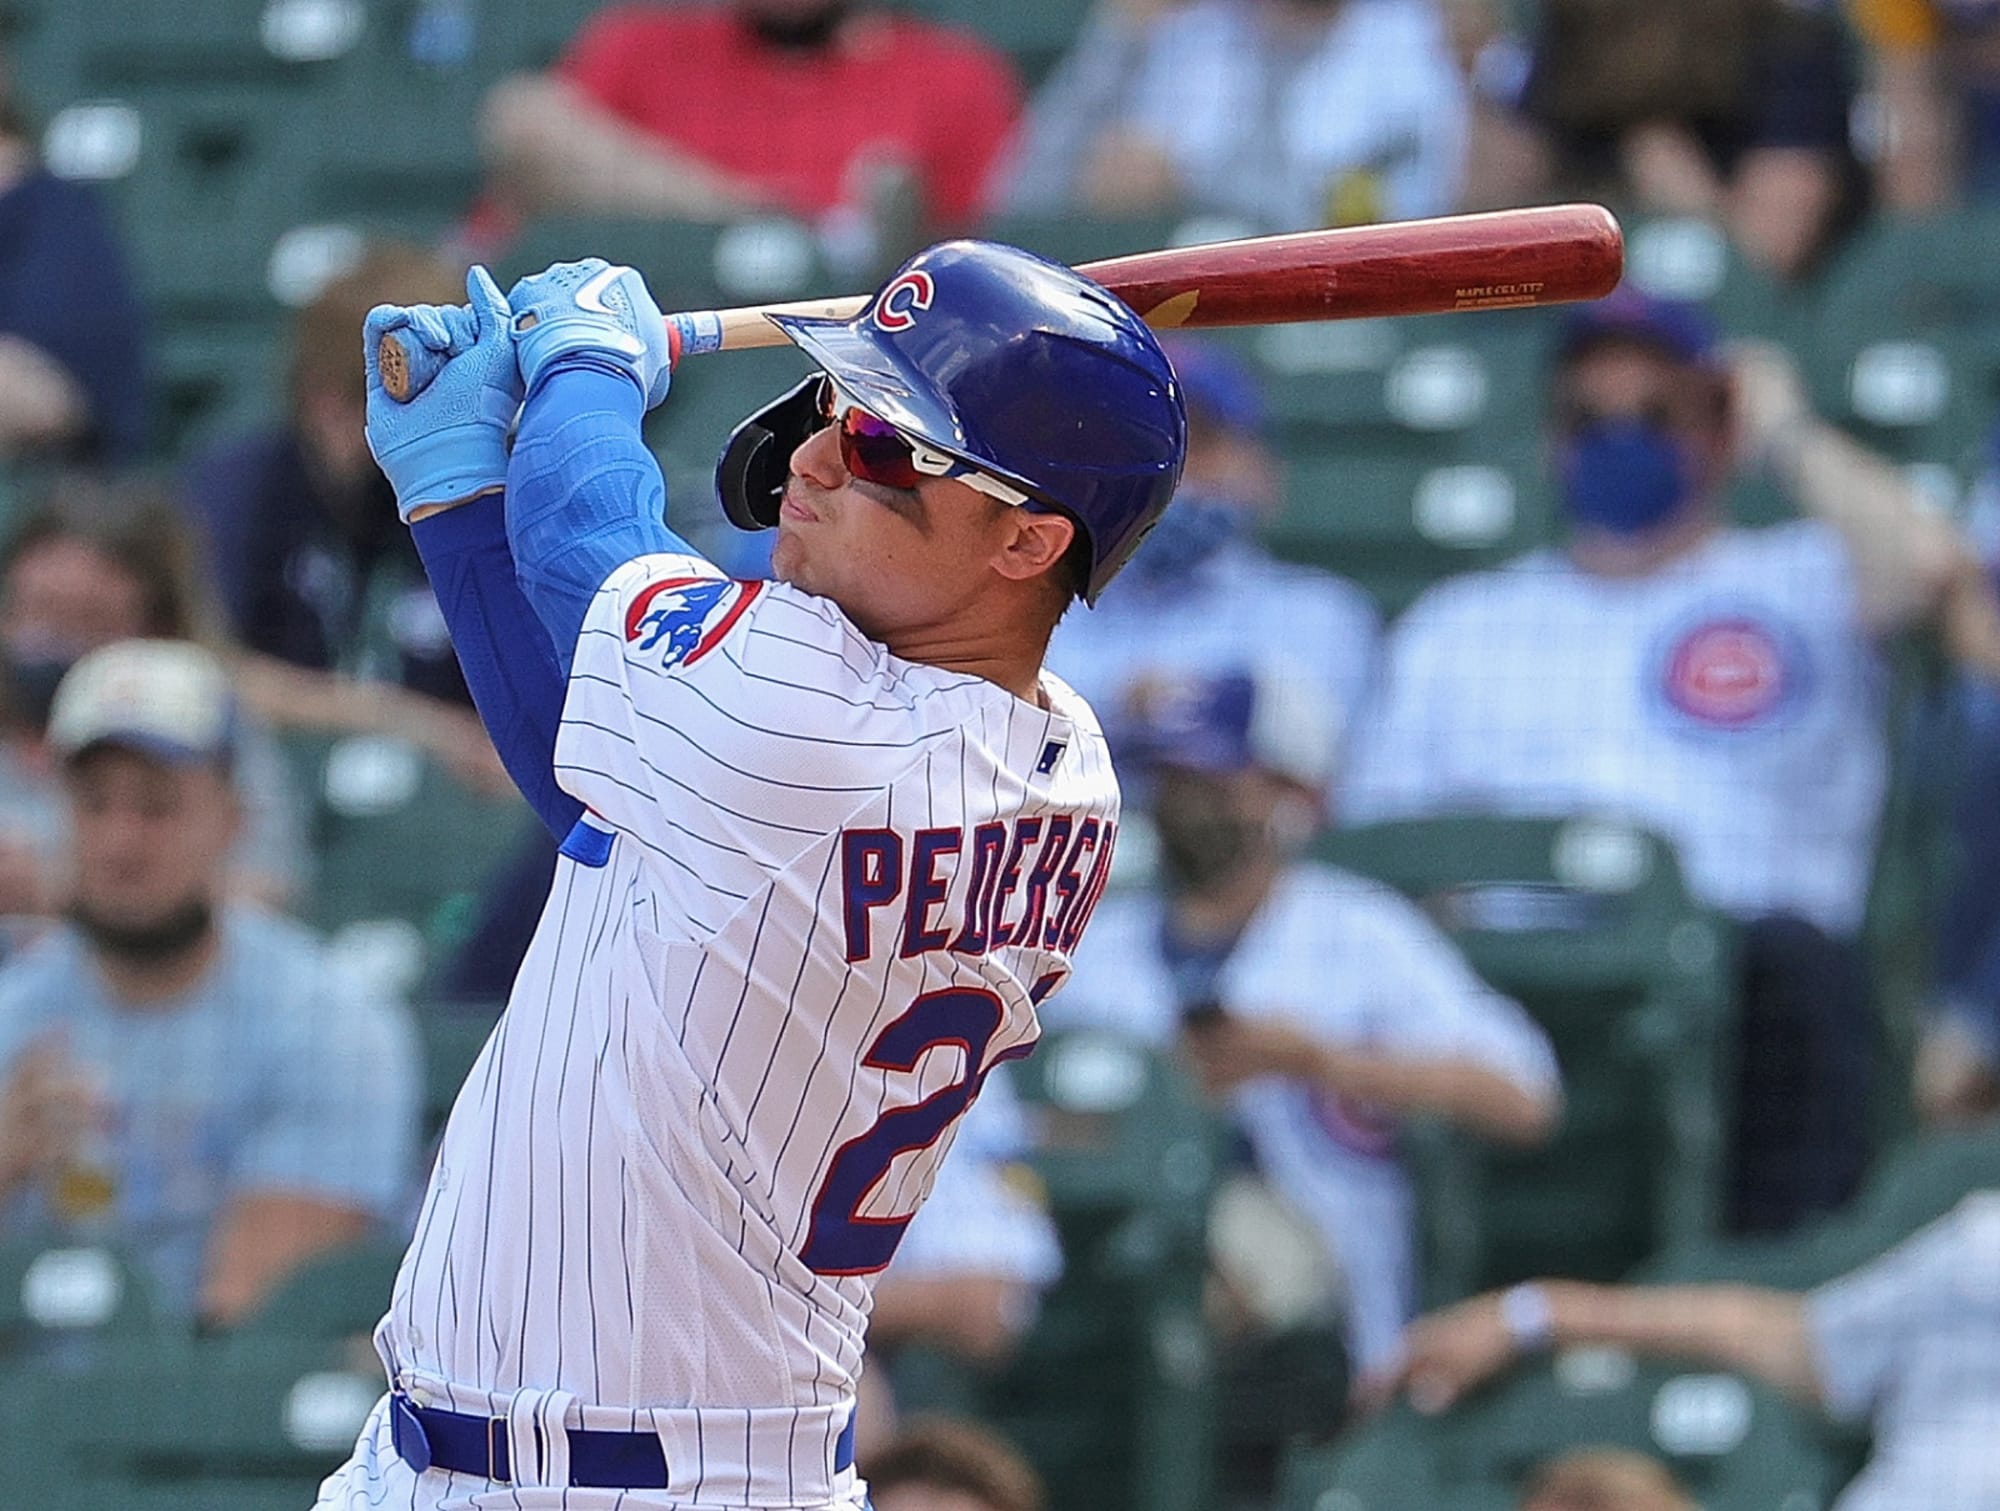 Braves acquire OF Joc Pederson in trade with Cubs